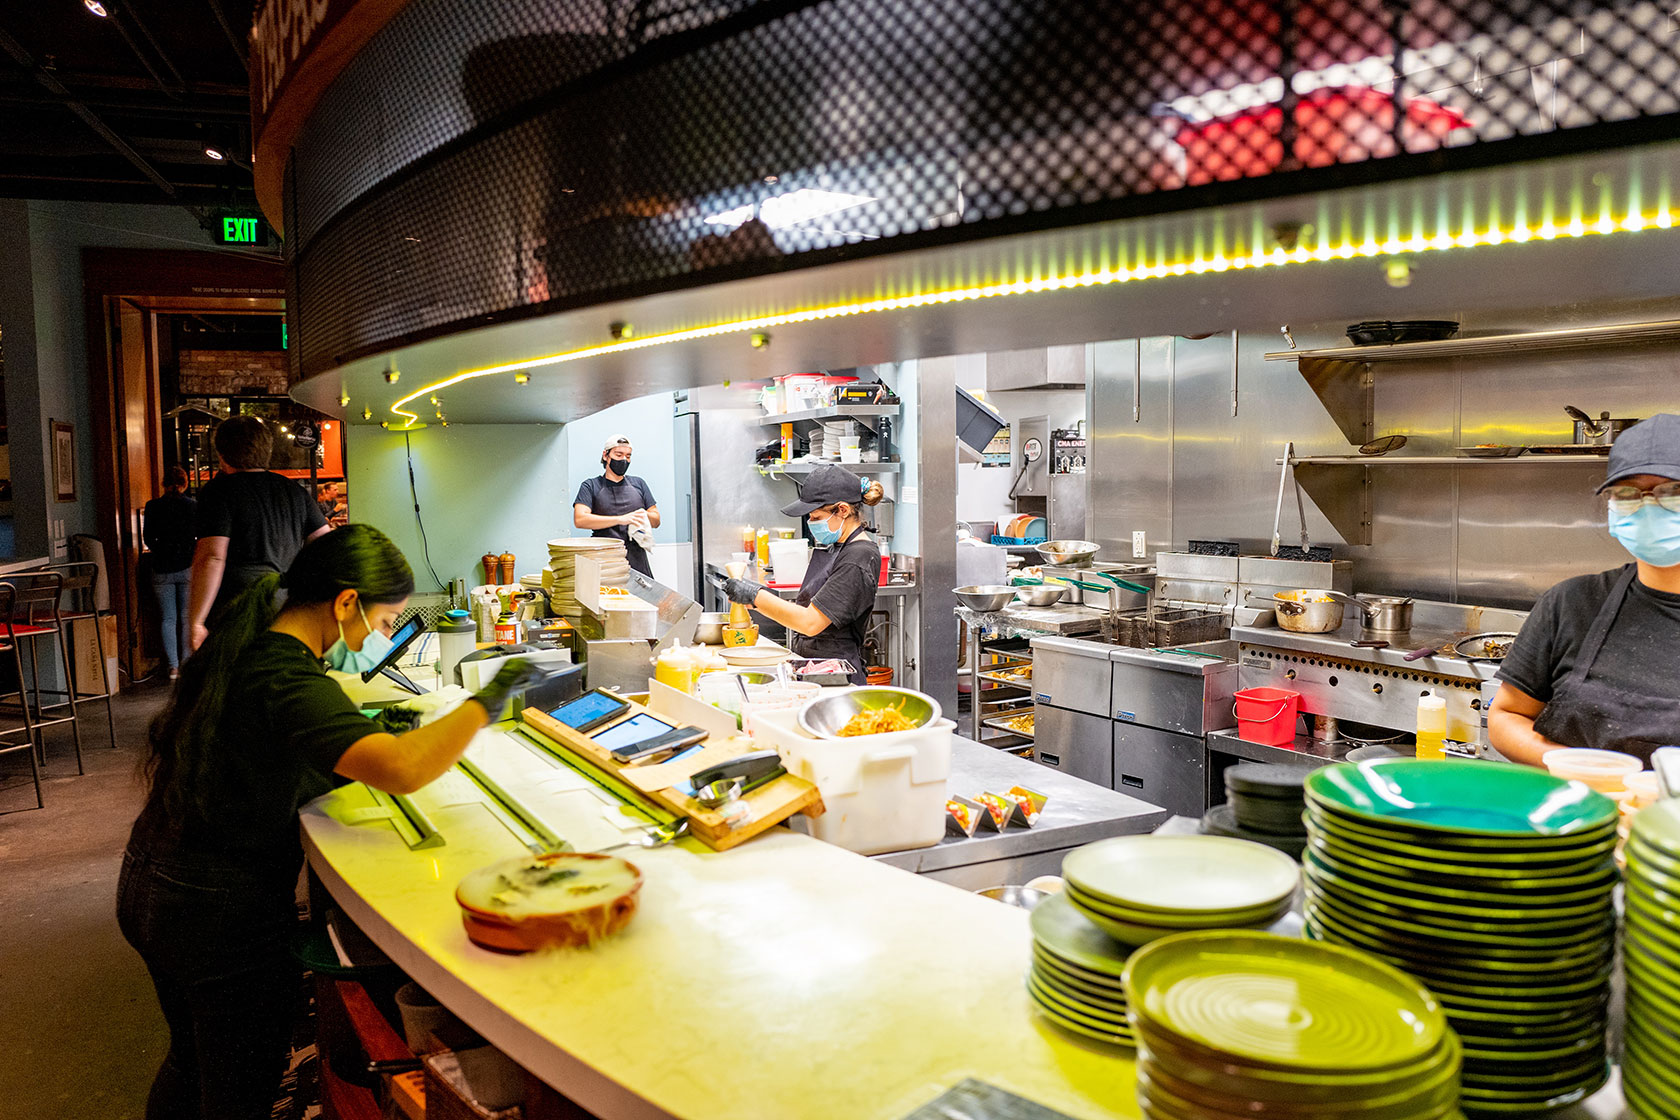 Photo shows a well-lit open kitchen area with chefs preparing food behind the counter and a server picking up plates